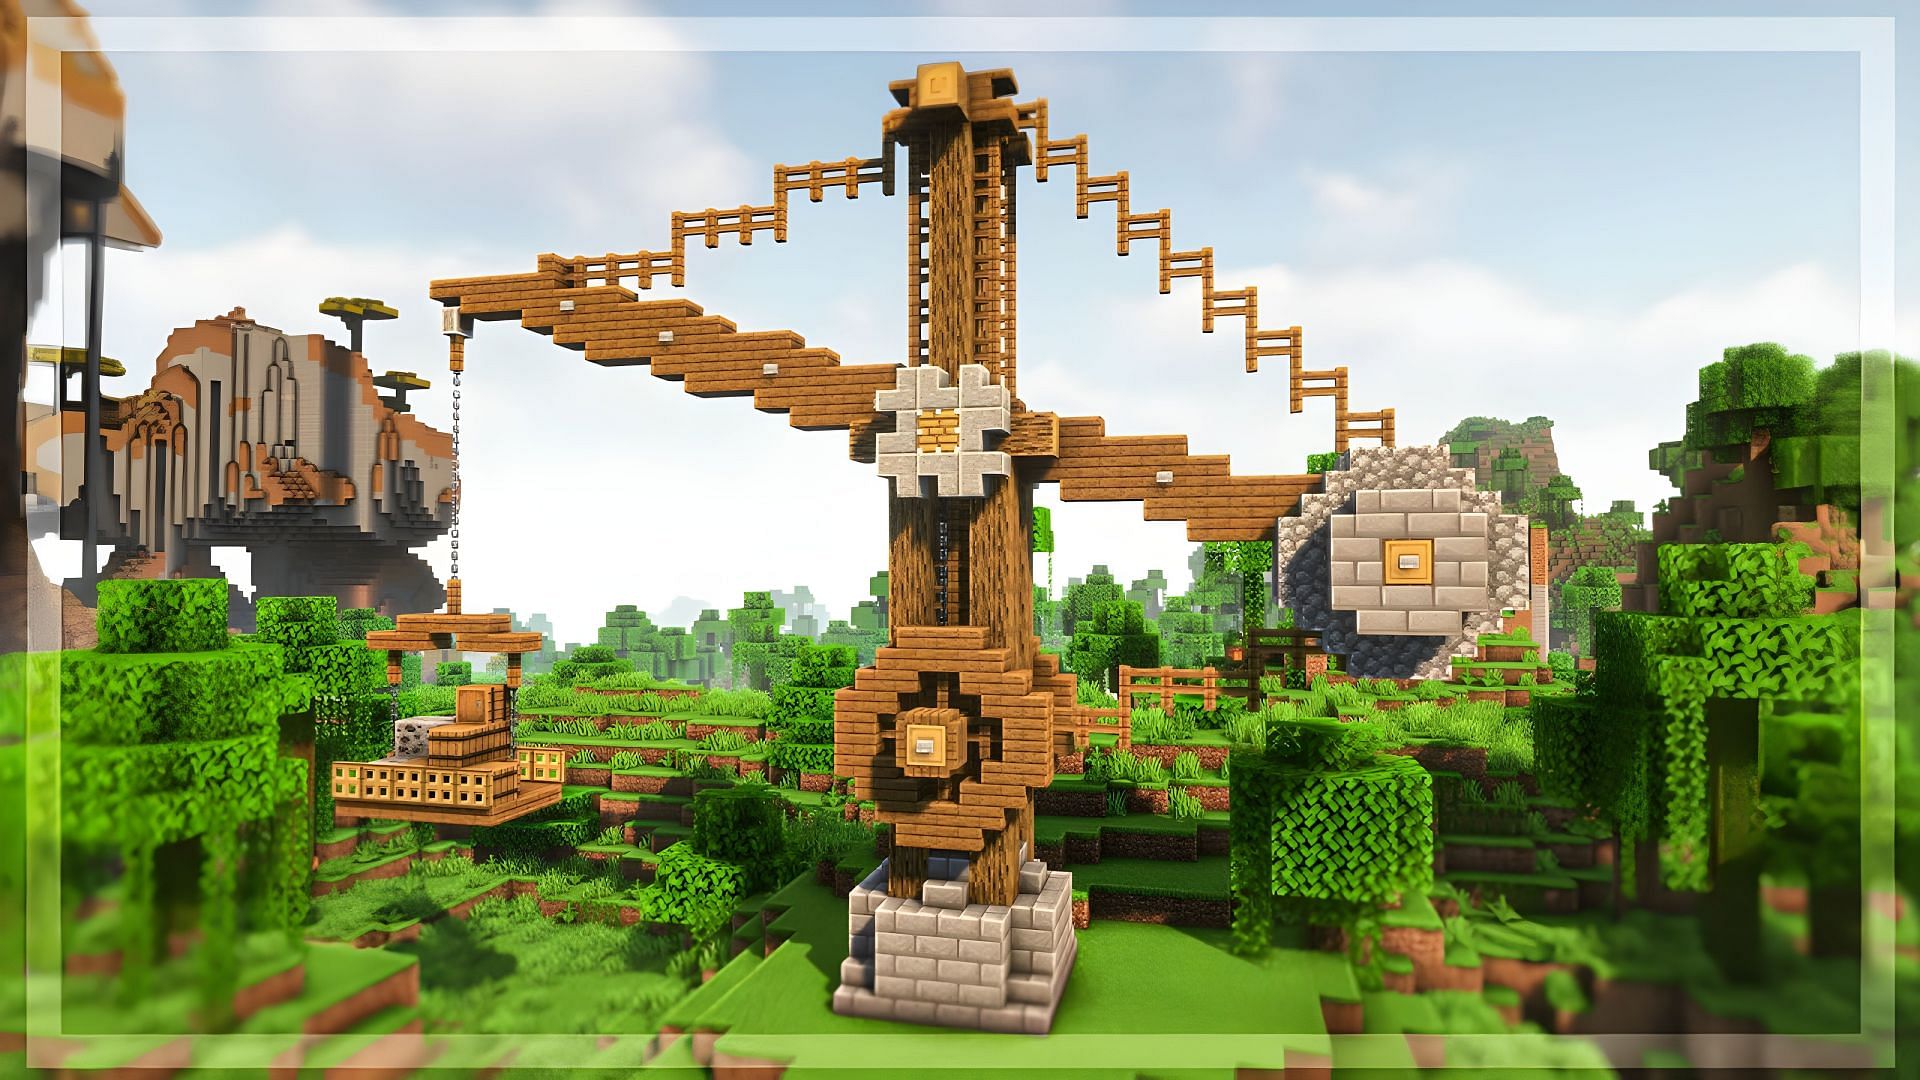 Minecraft crane builds are a unique type of build since they